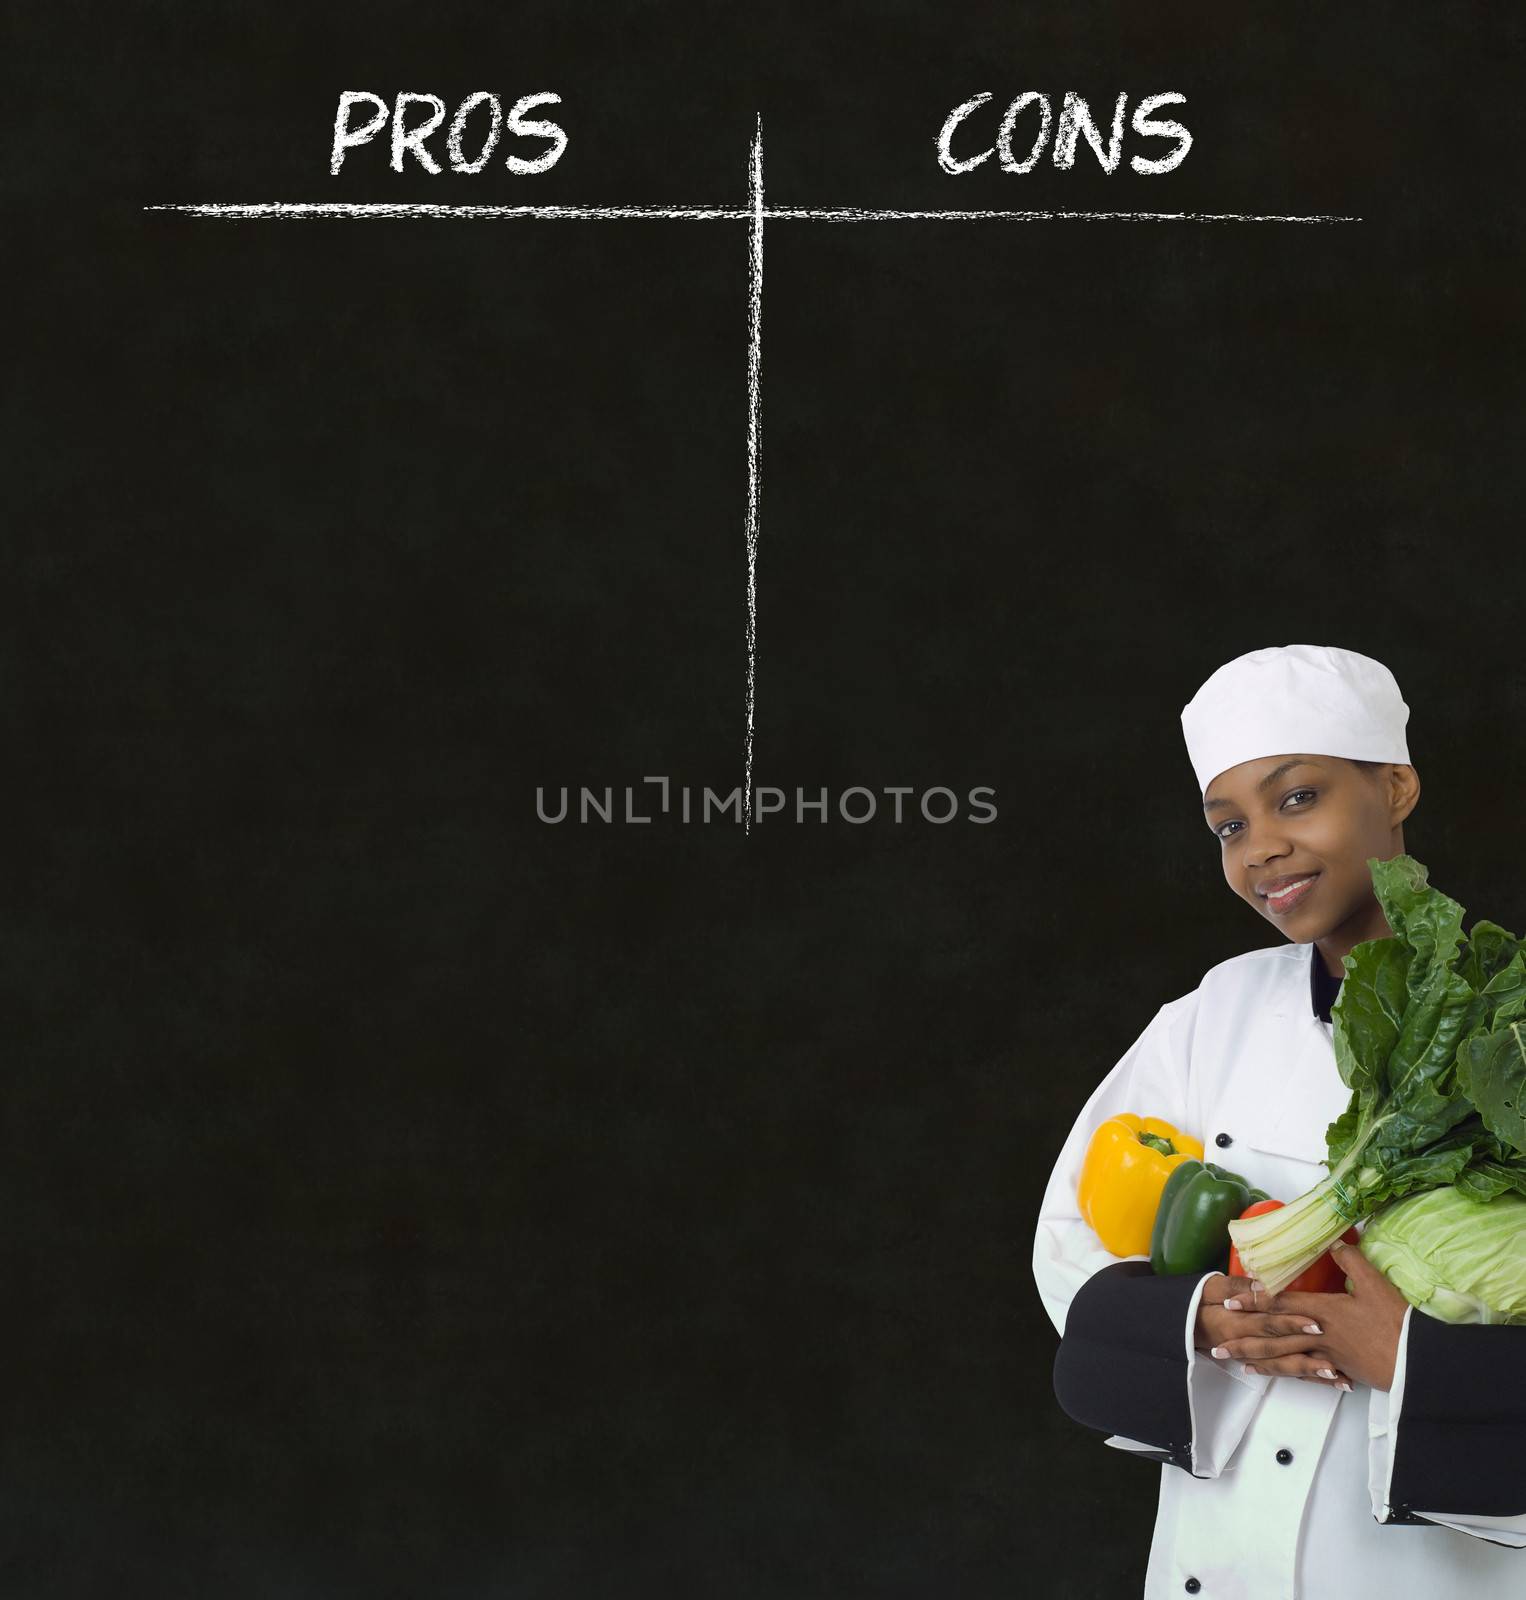 African American woman chef with chalk pros and cons on blackboard background